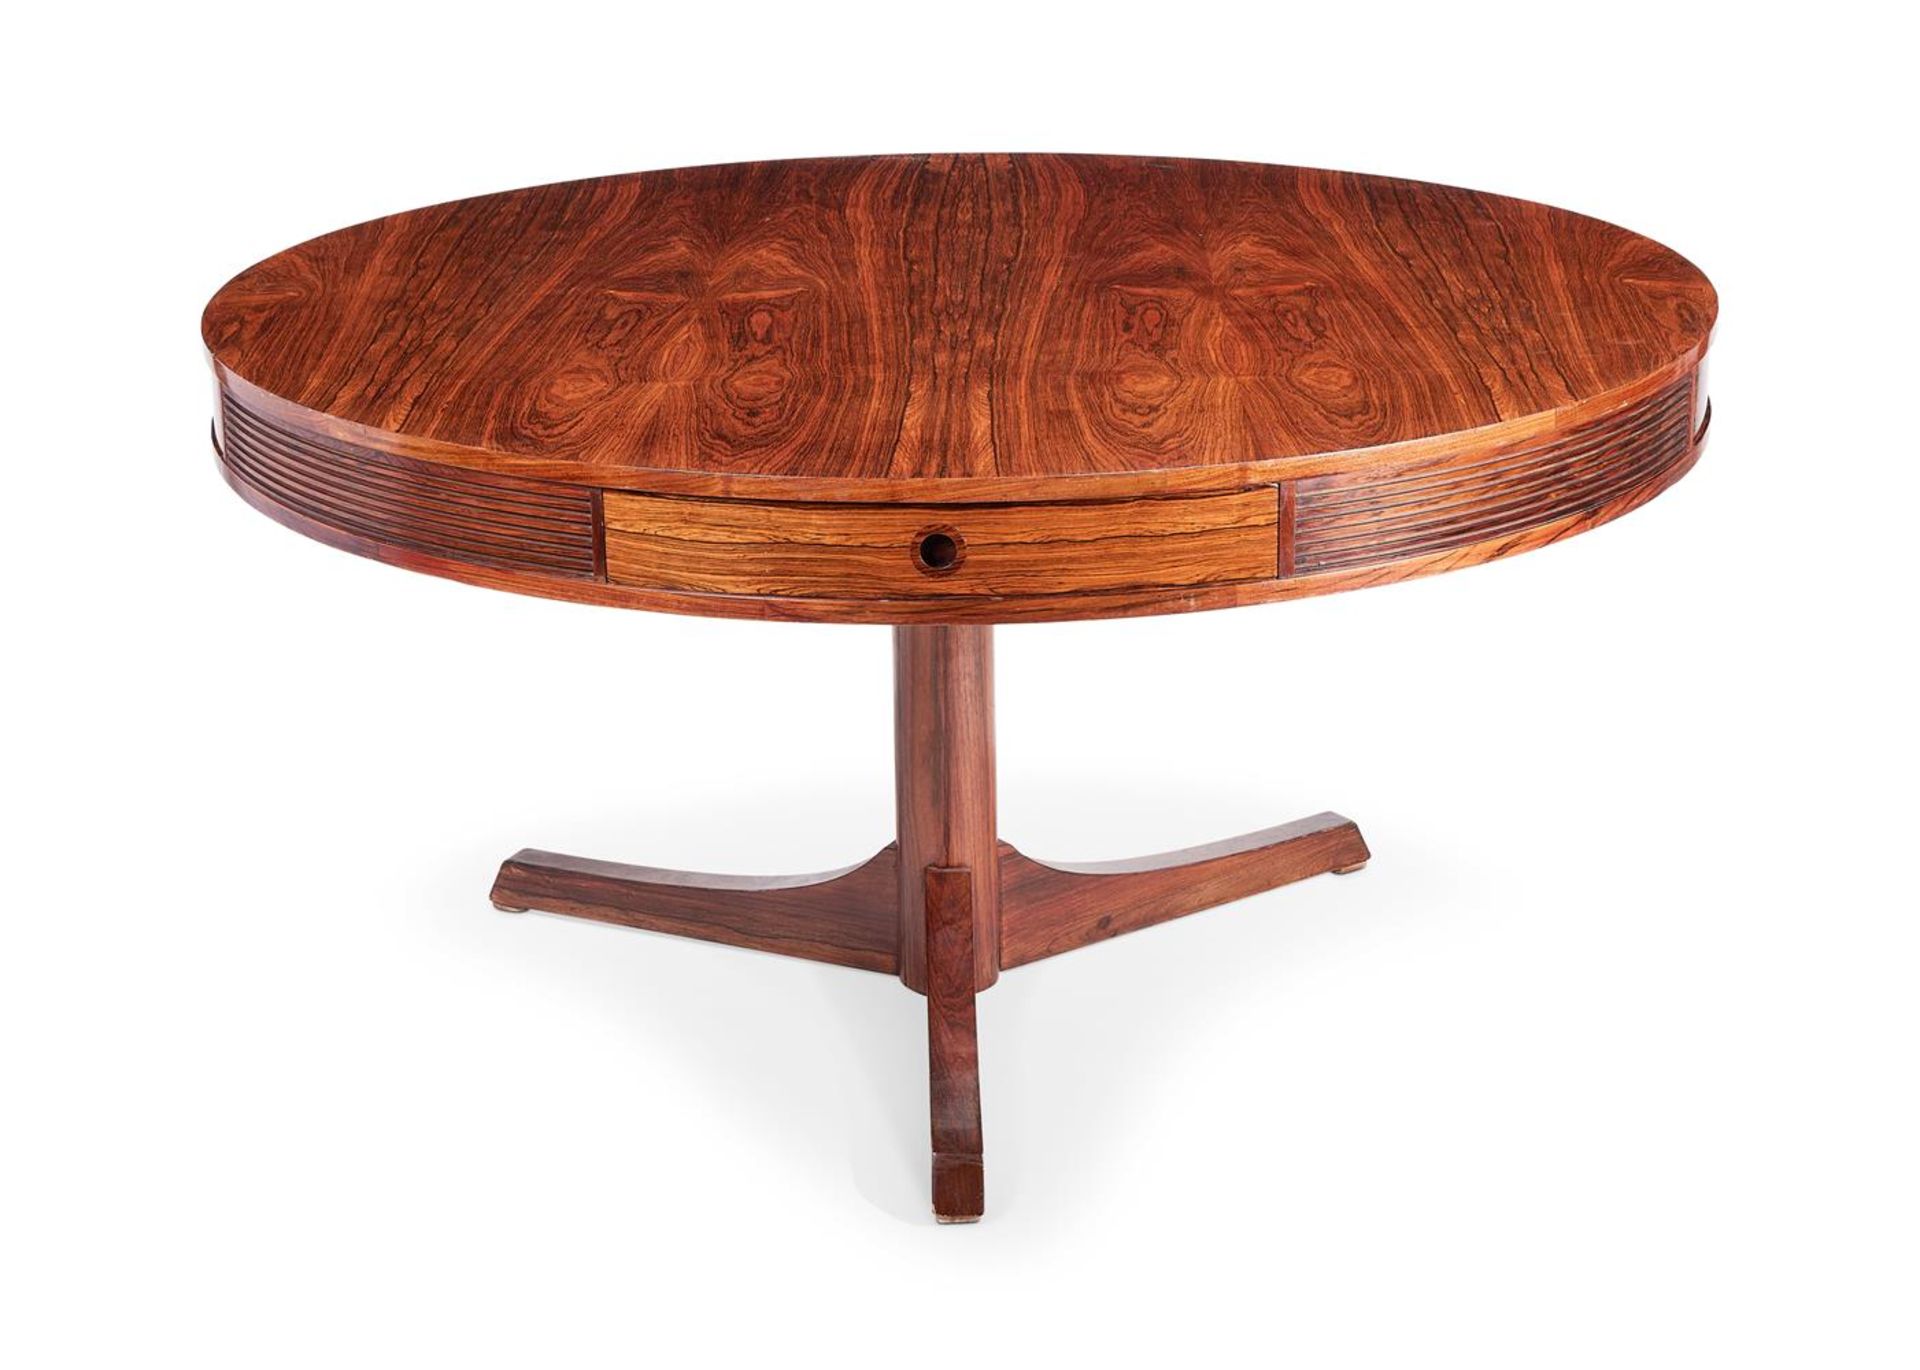 Y A ROSEWOOD CENTRE TABLE DESIGNED BY ROBERT HERITAGE (1927-2008)